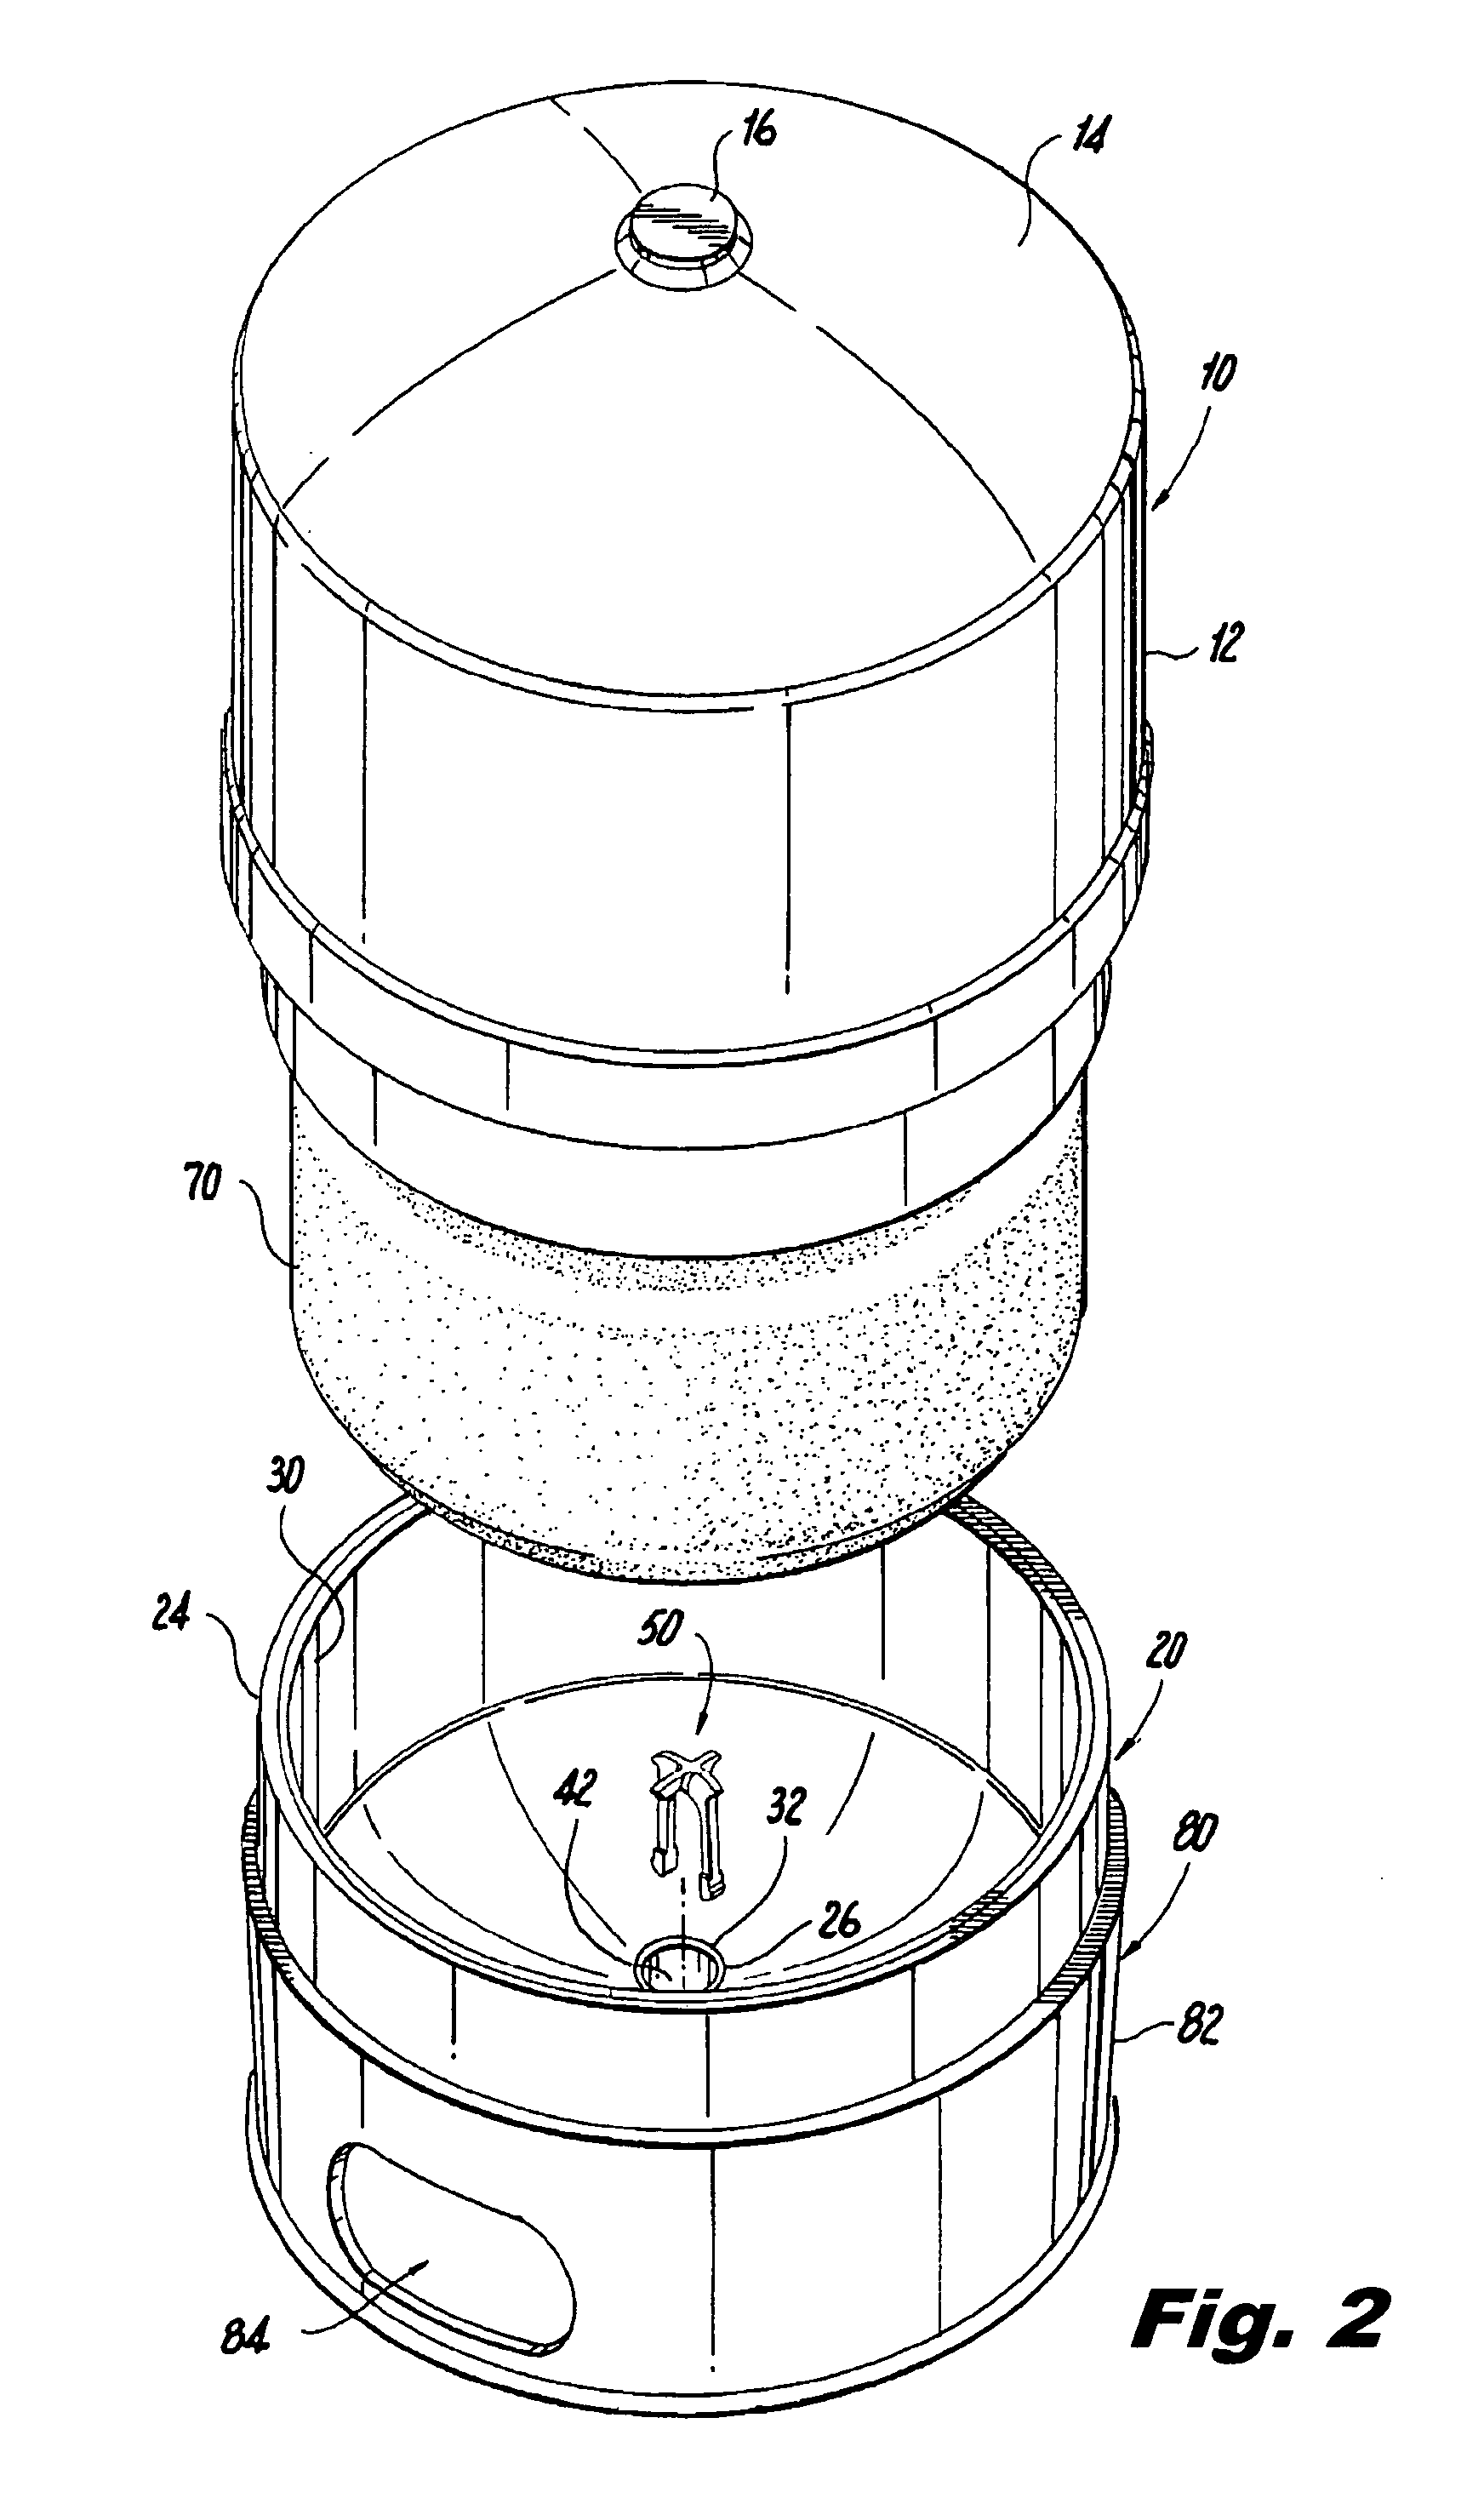 Device for causing turbulent flow in a tank assembly